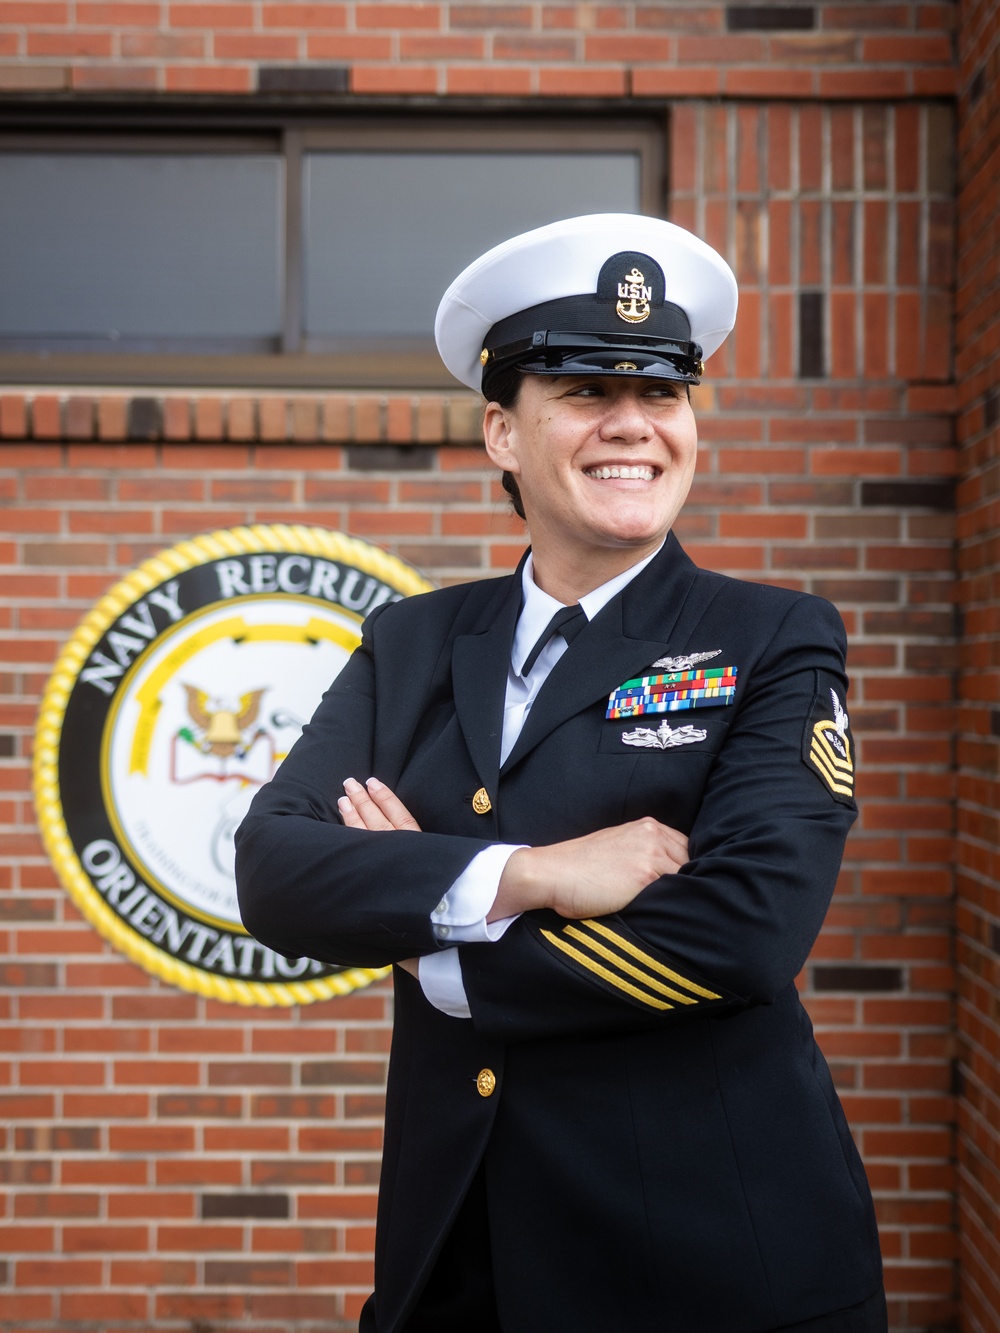 Sailor of the Year Awardee Talks Recruiting, Teamwork, &amp; Special Advancement